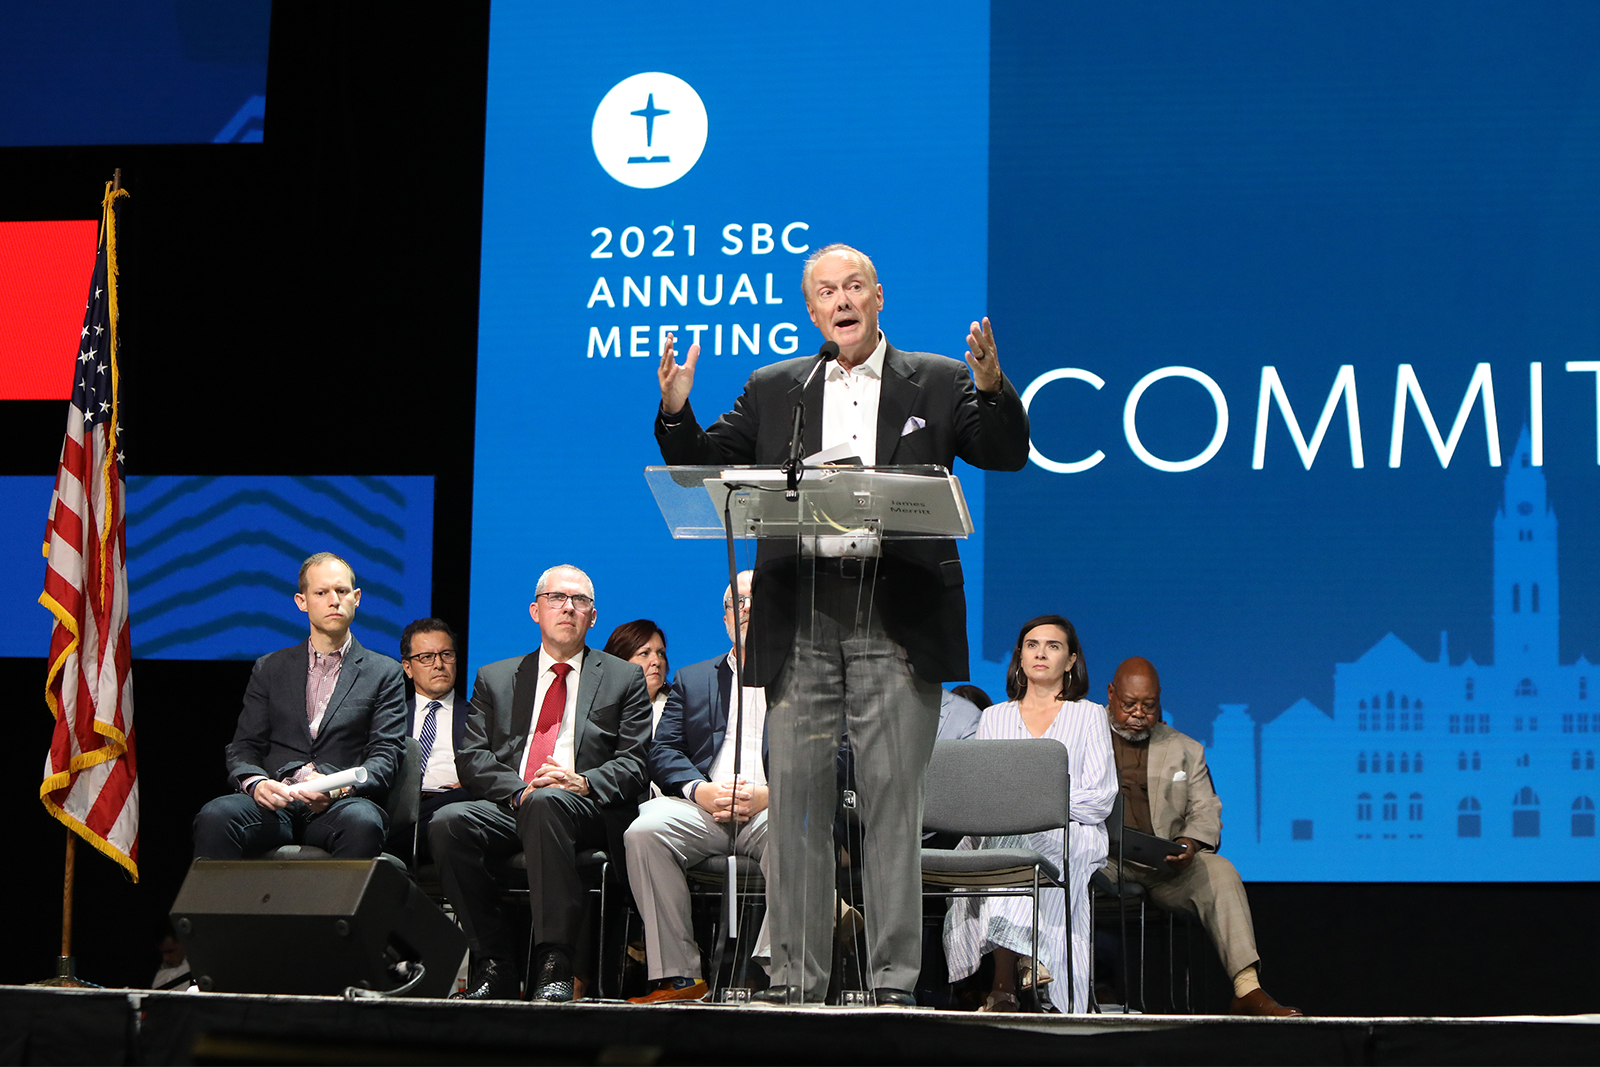 James Merritt, backed by members of the Committee on Resolutions, addresses the Southern Baptist Convention annual meeting June 15, 2021, in Nashville, Tennessee. A then member of the committee, Bart Barber is now the committee chair. RNS photo by Kit Doyle